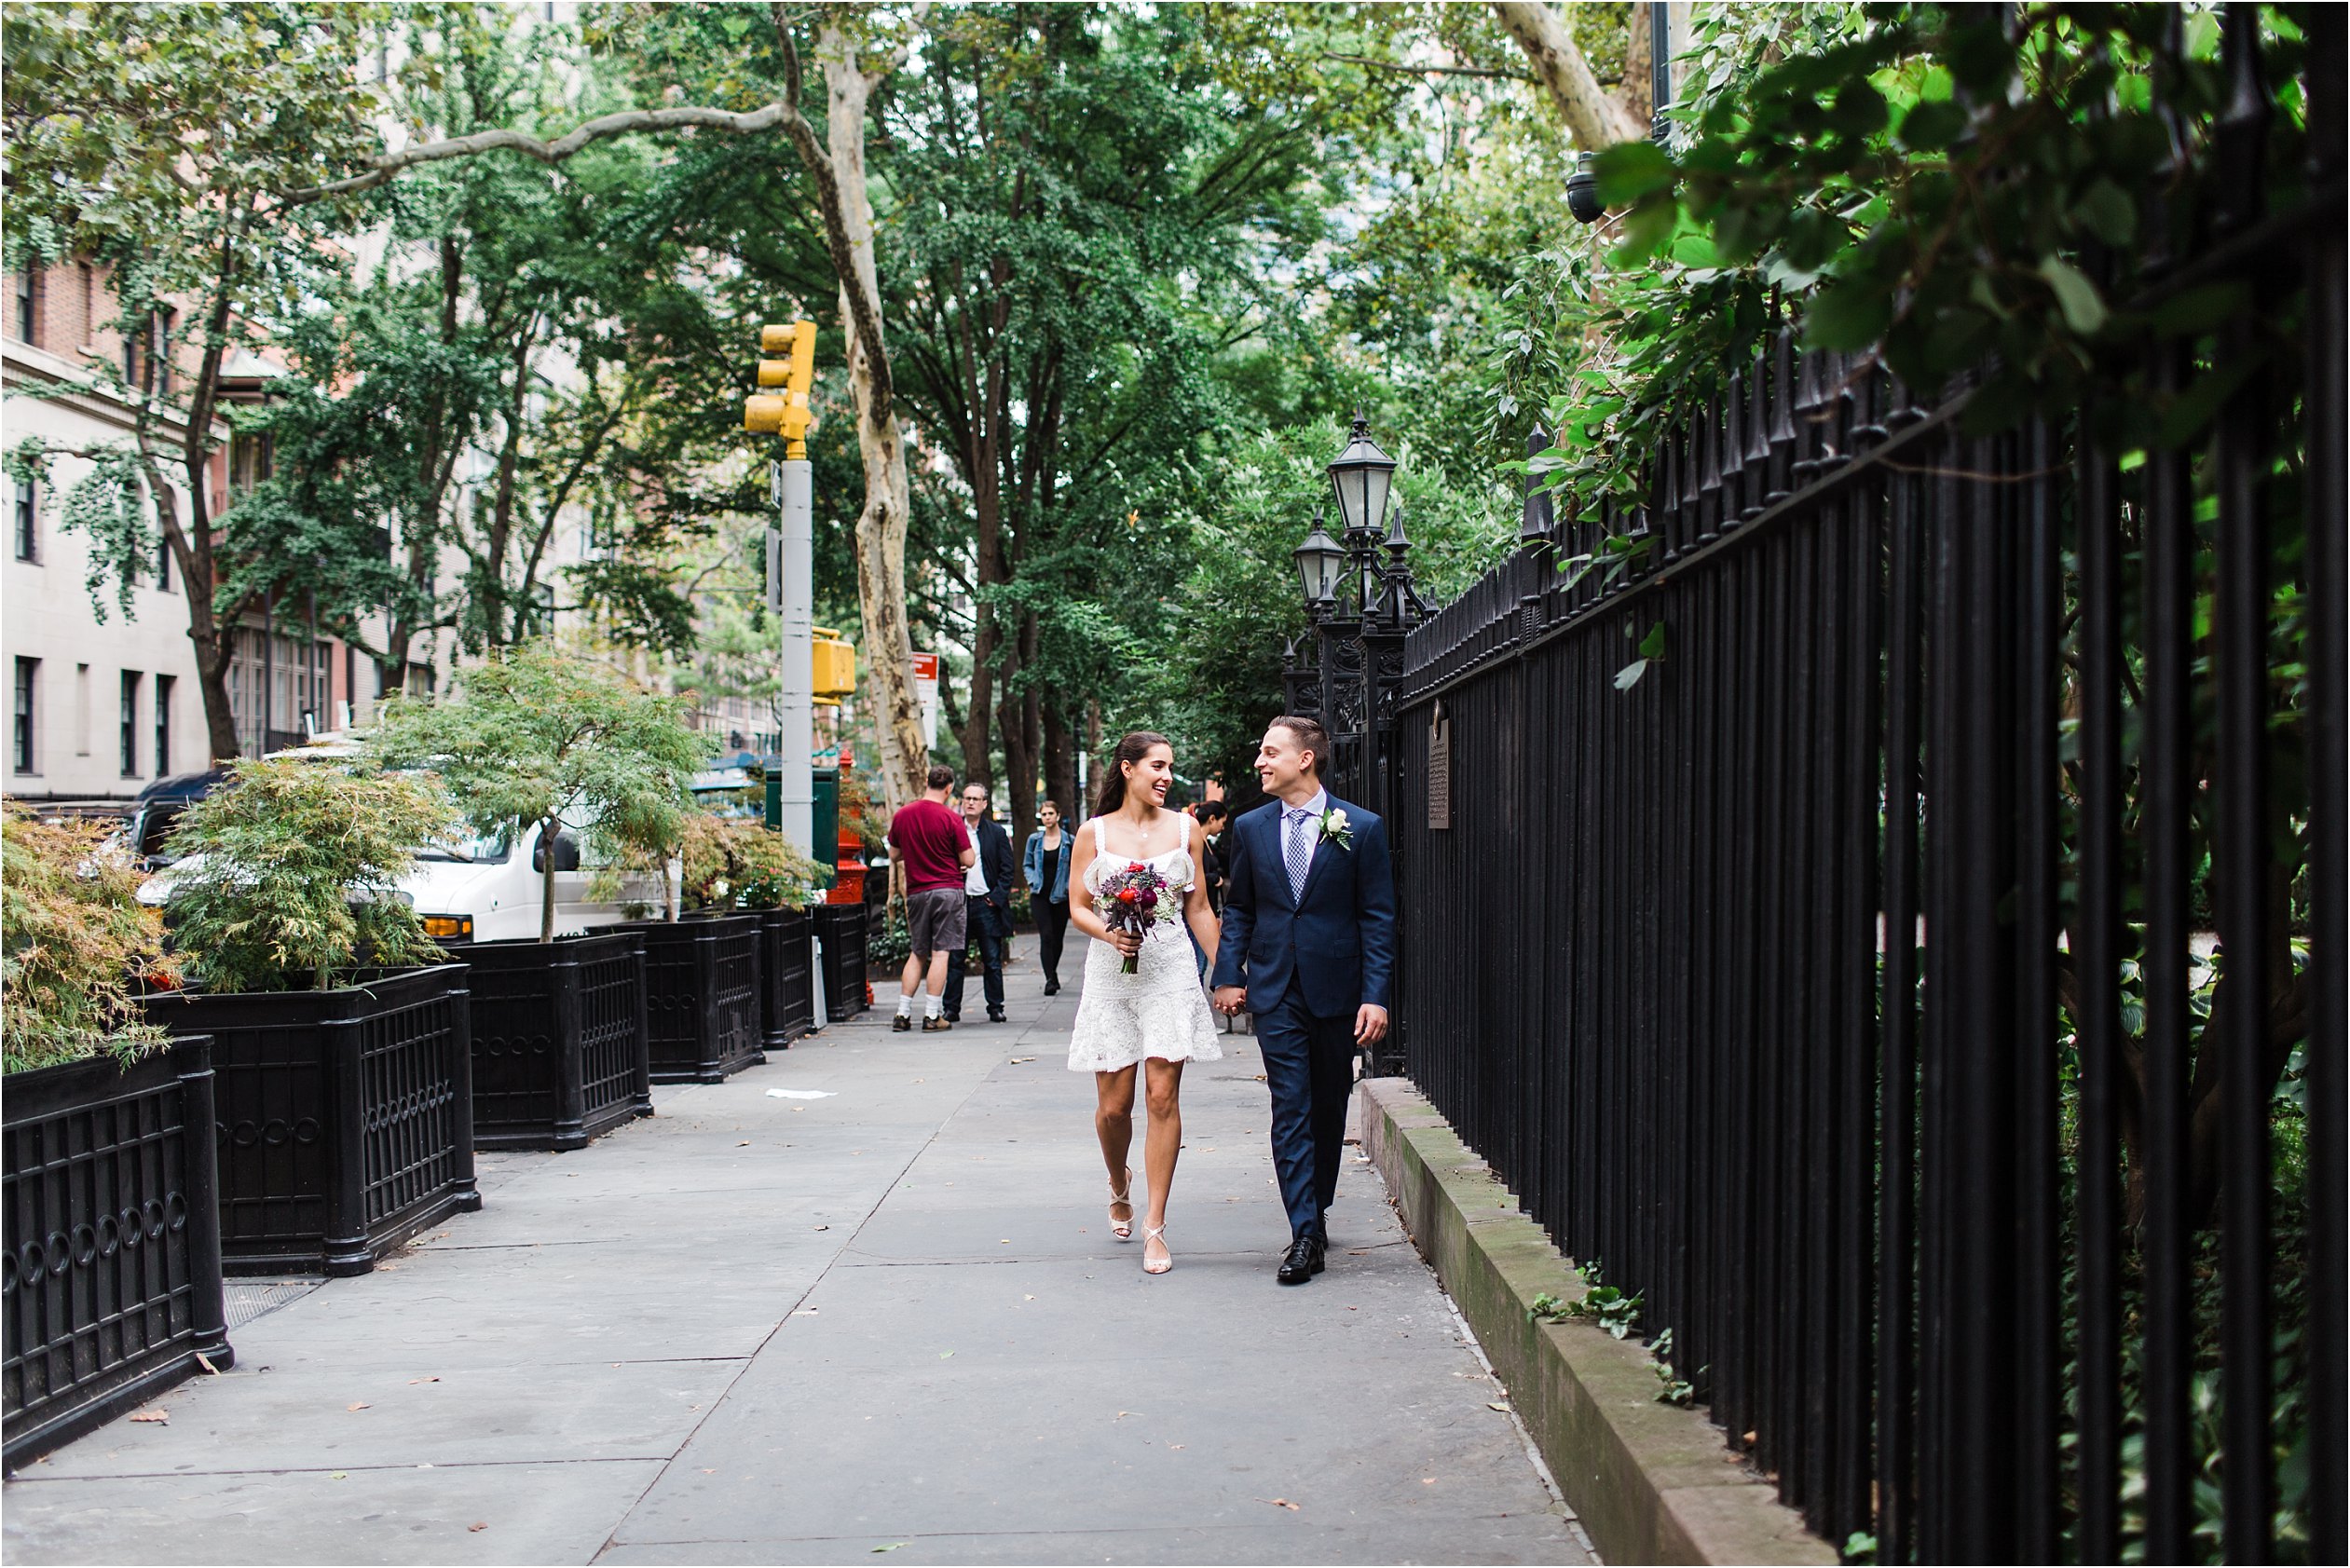 Bride and groom portrait at Gramercy Square Park